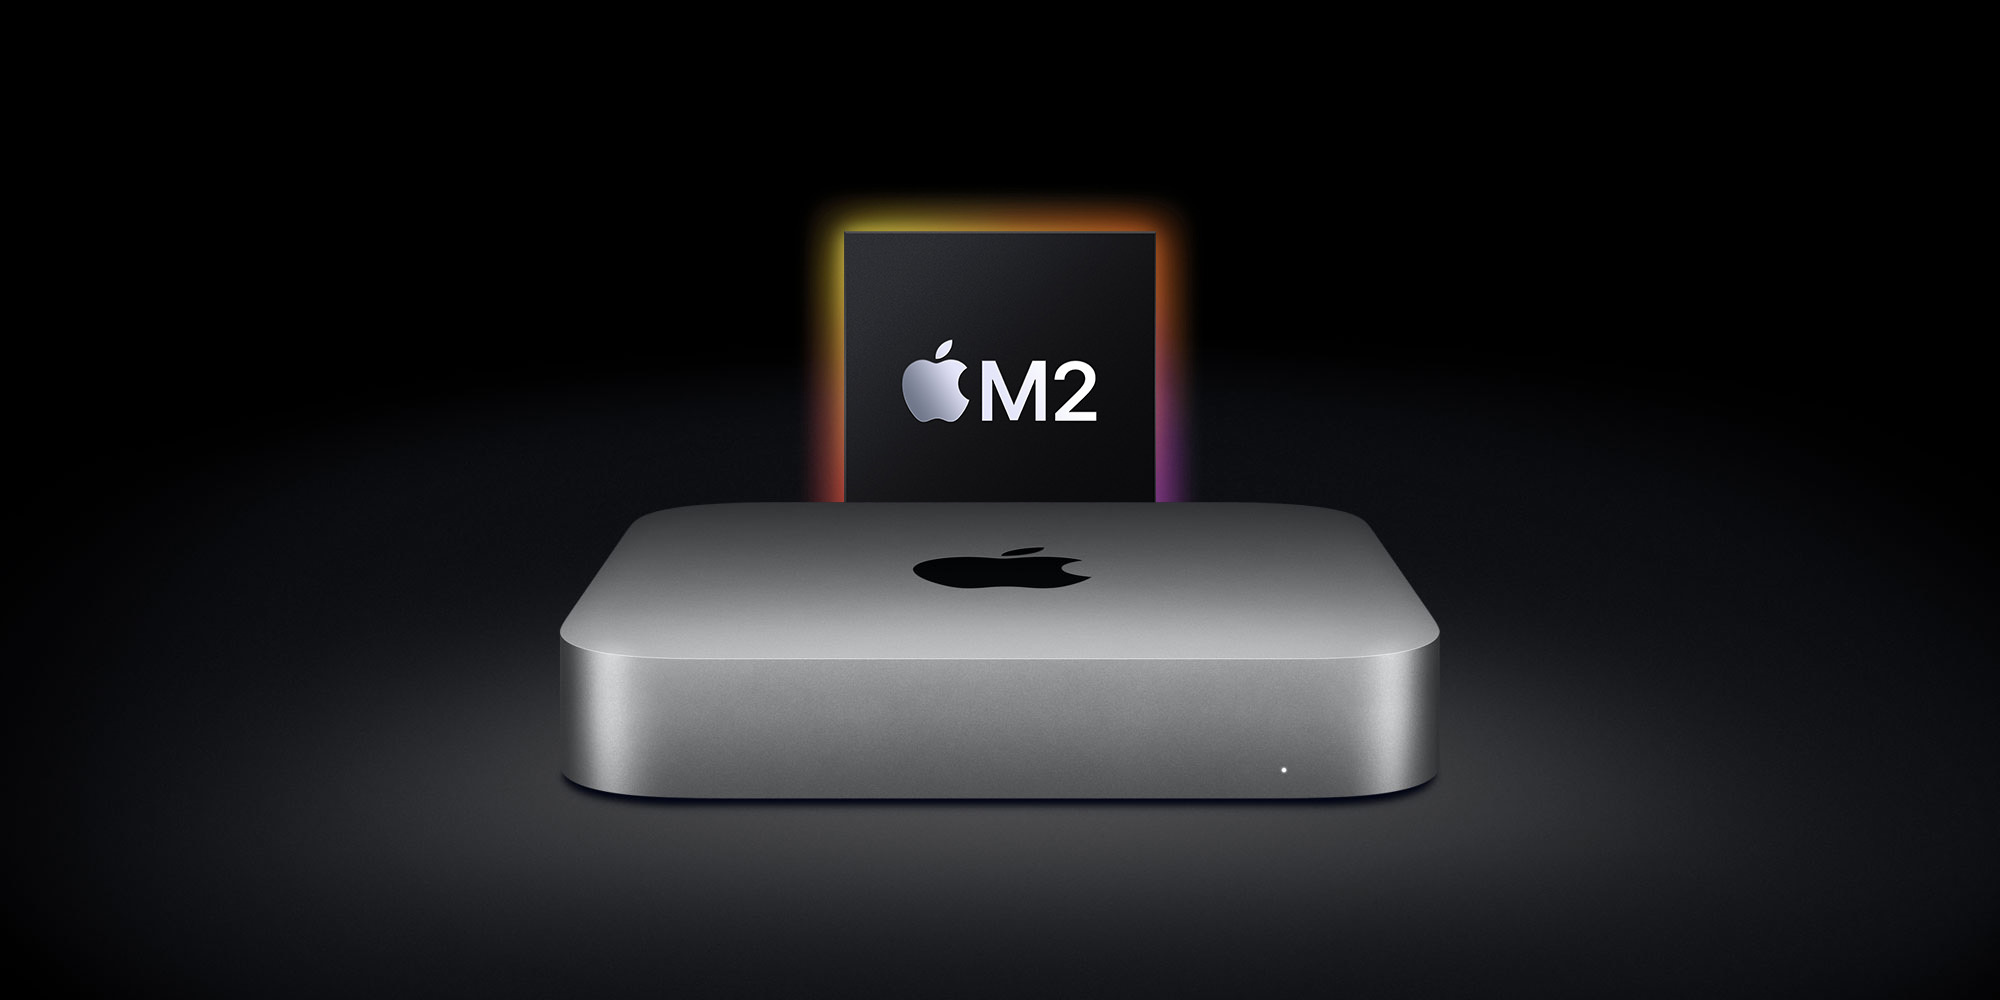 M2 Mac mini: Here's everything we know